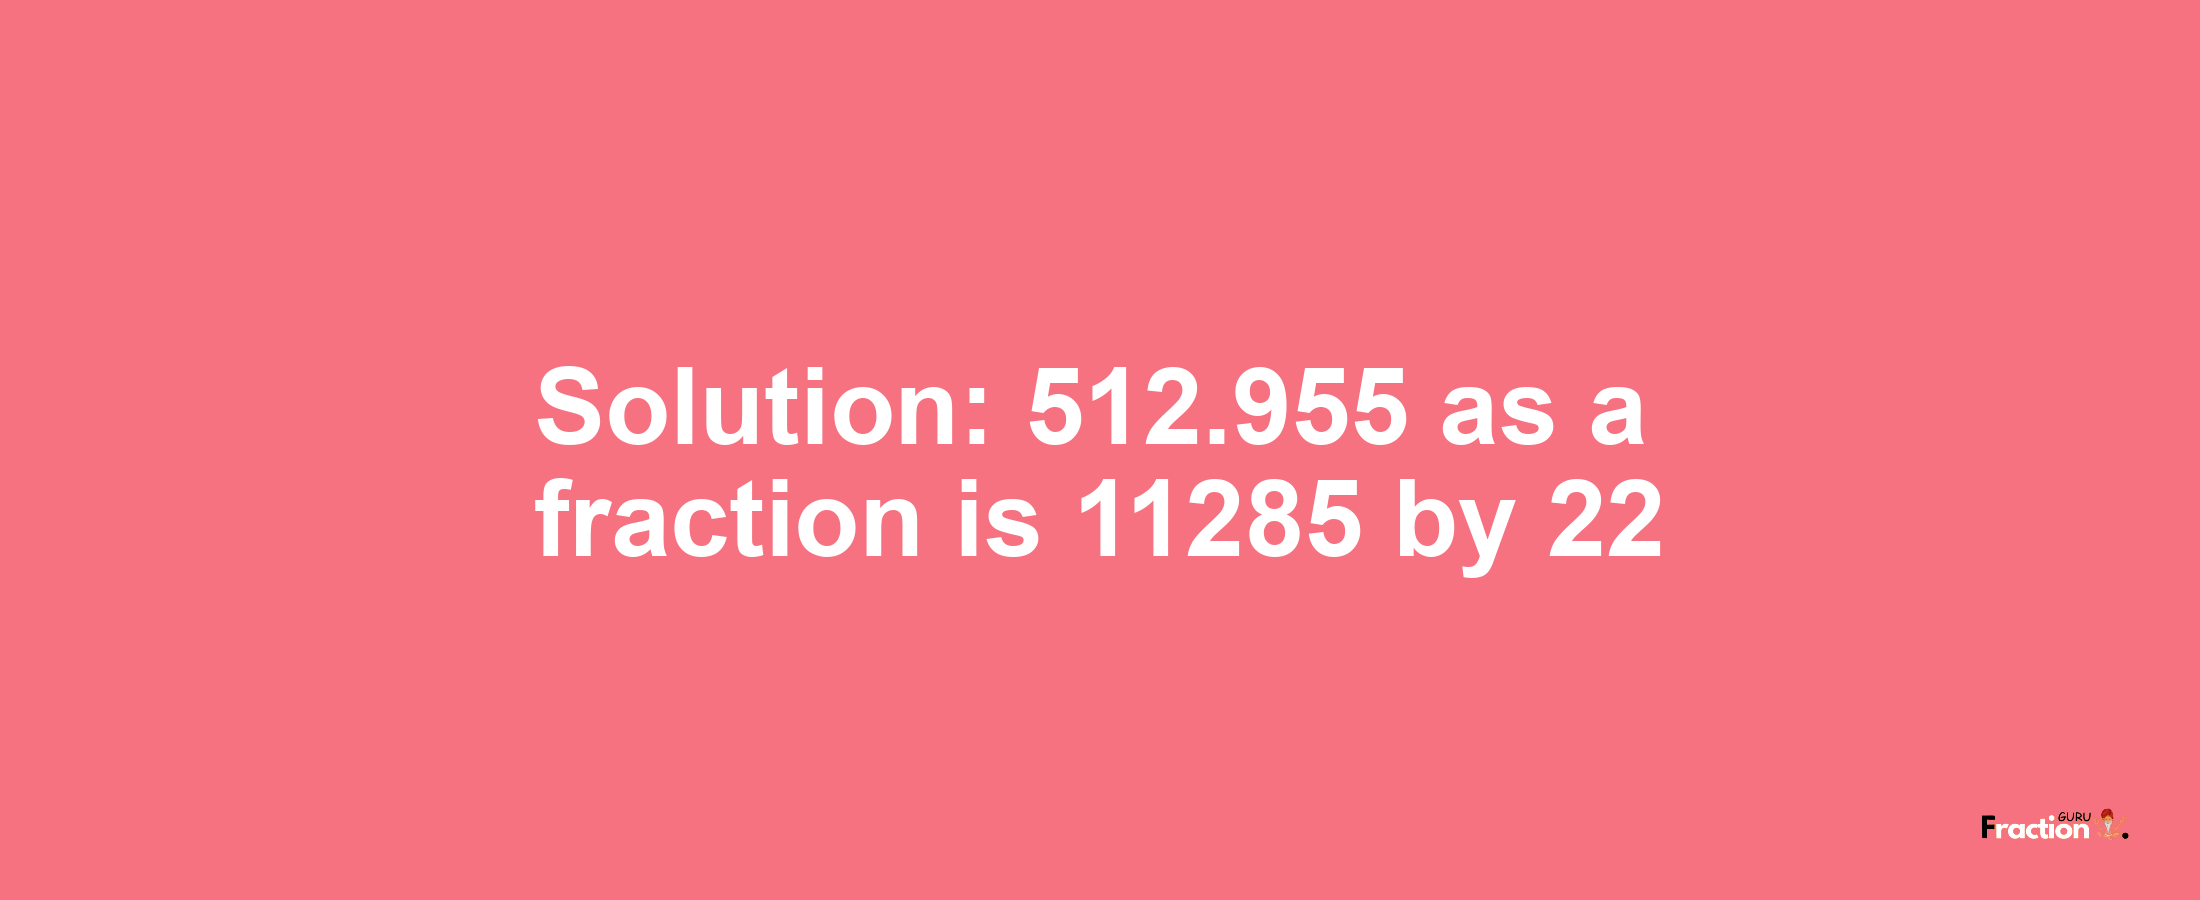 Solution:512.955 as a fraction is 11285/22